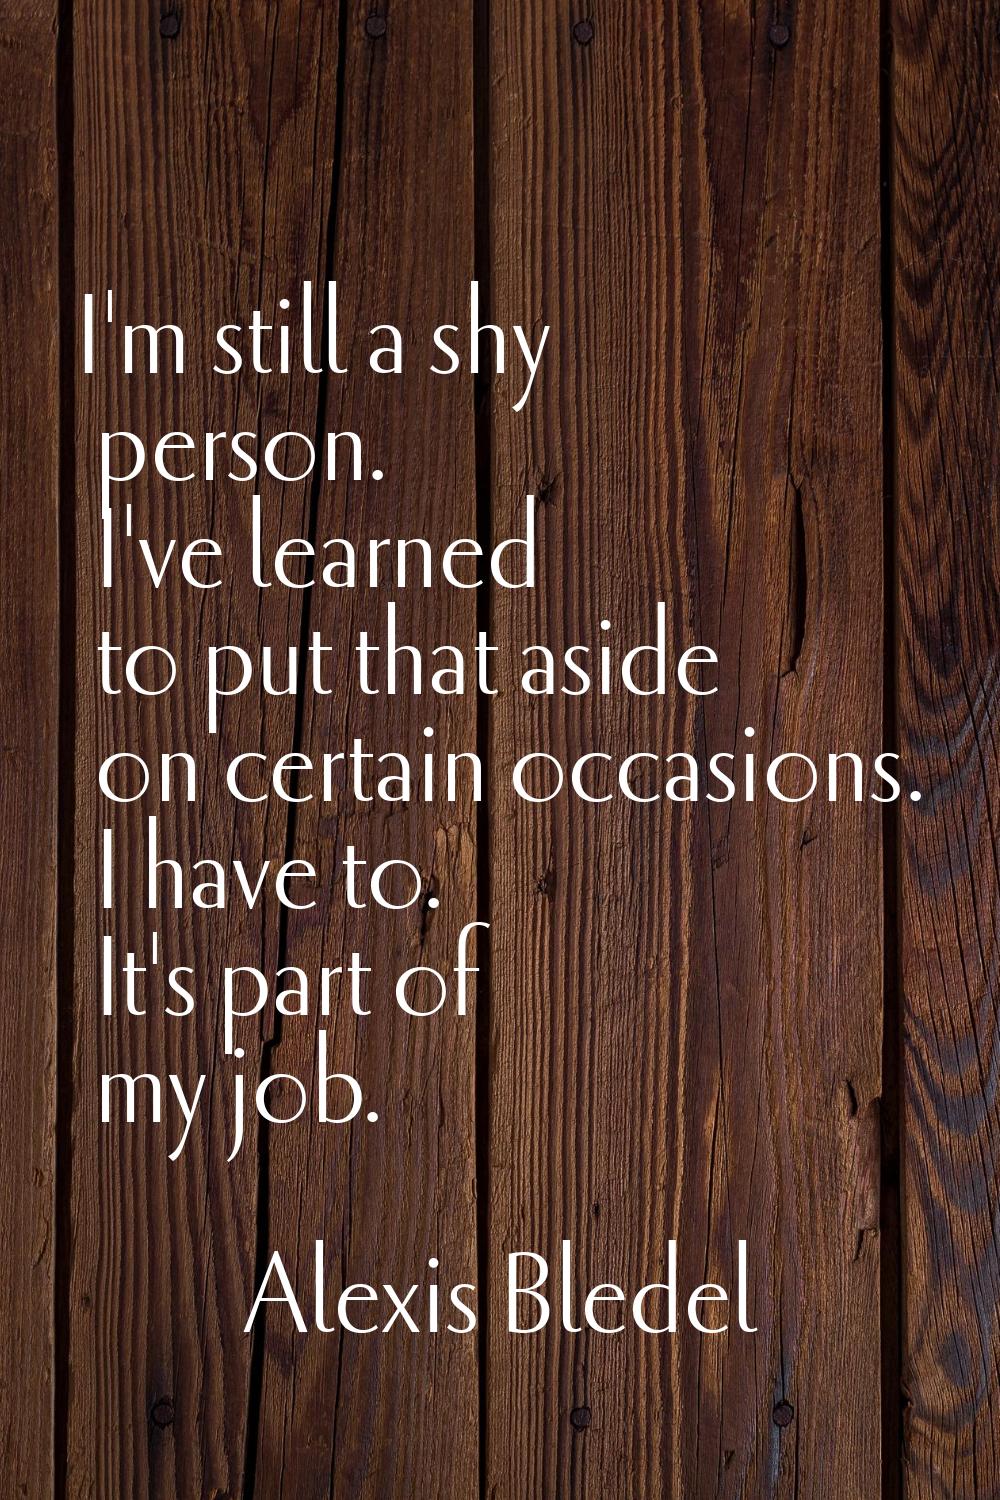 I'm still a shy person. I've learned to put that aside on certain occasions. I have to. It's part o